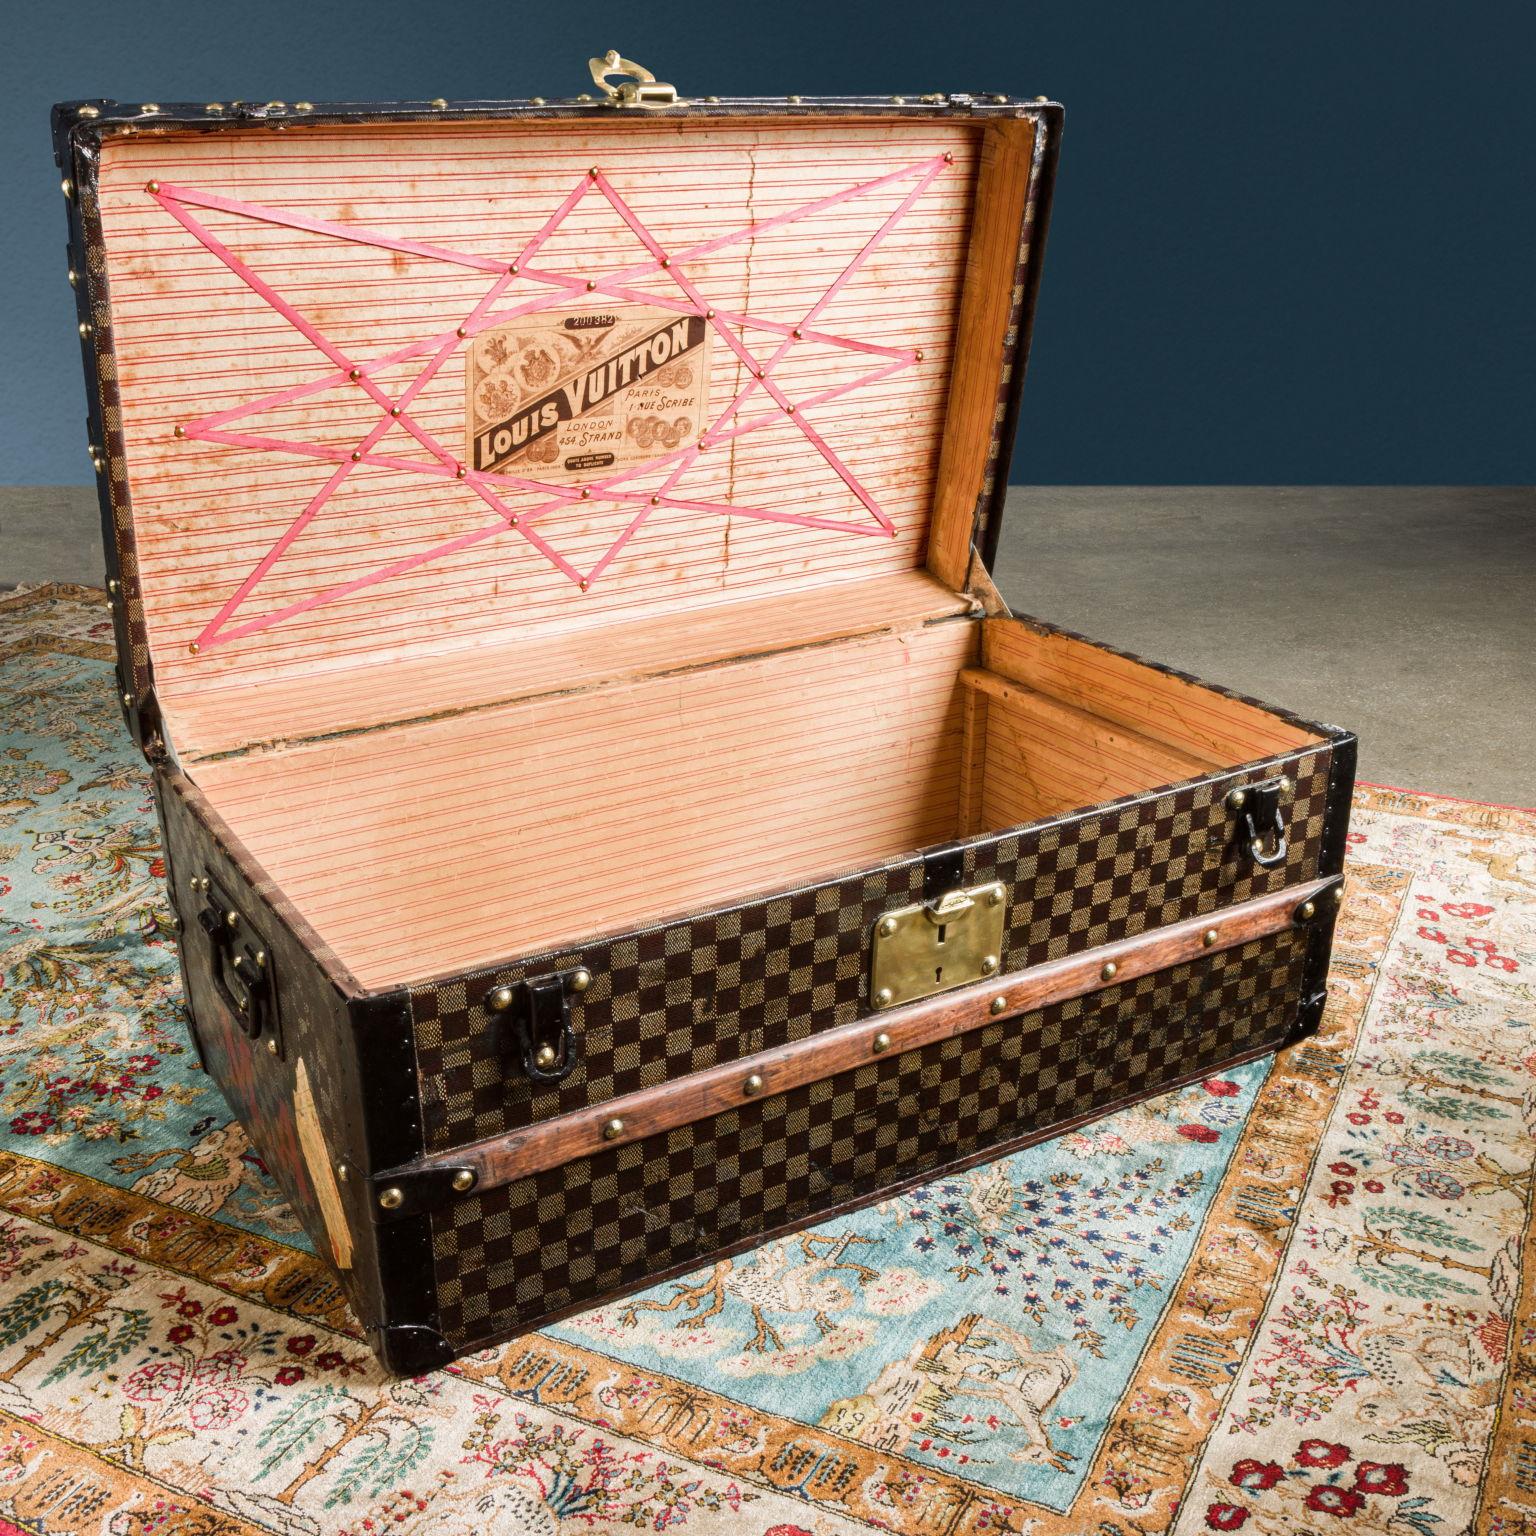 Louis Vuitton trunk from the late 1800s, restored to its original condition. It is a malle cabine, that is a trunk with a compact shape and small dimensions, created to be stored under the bed of the cabins of transatlantic liners. Upholstered in